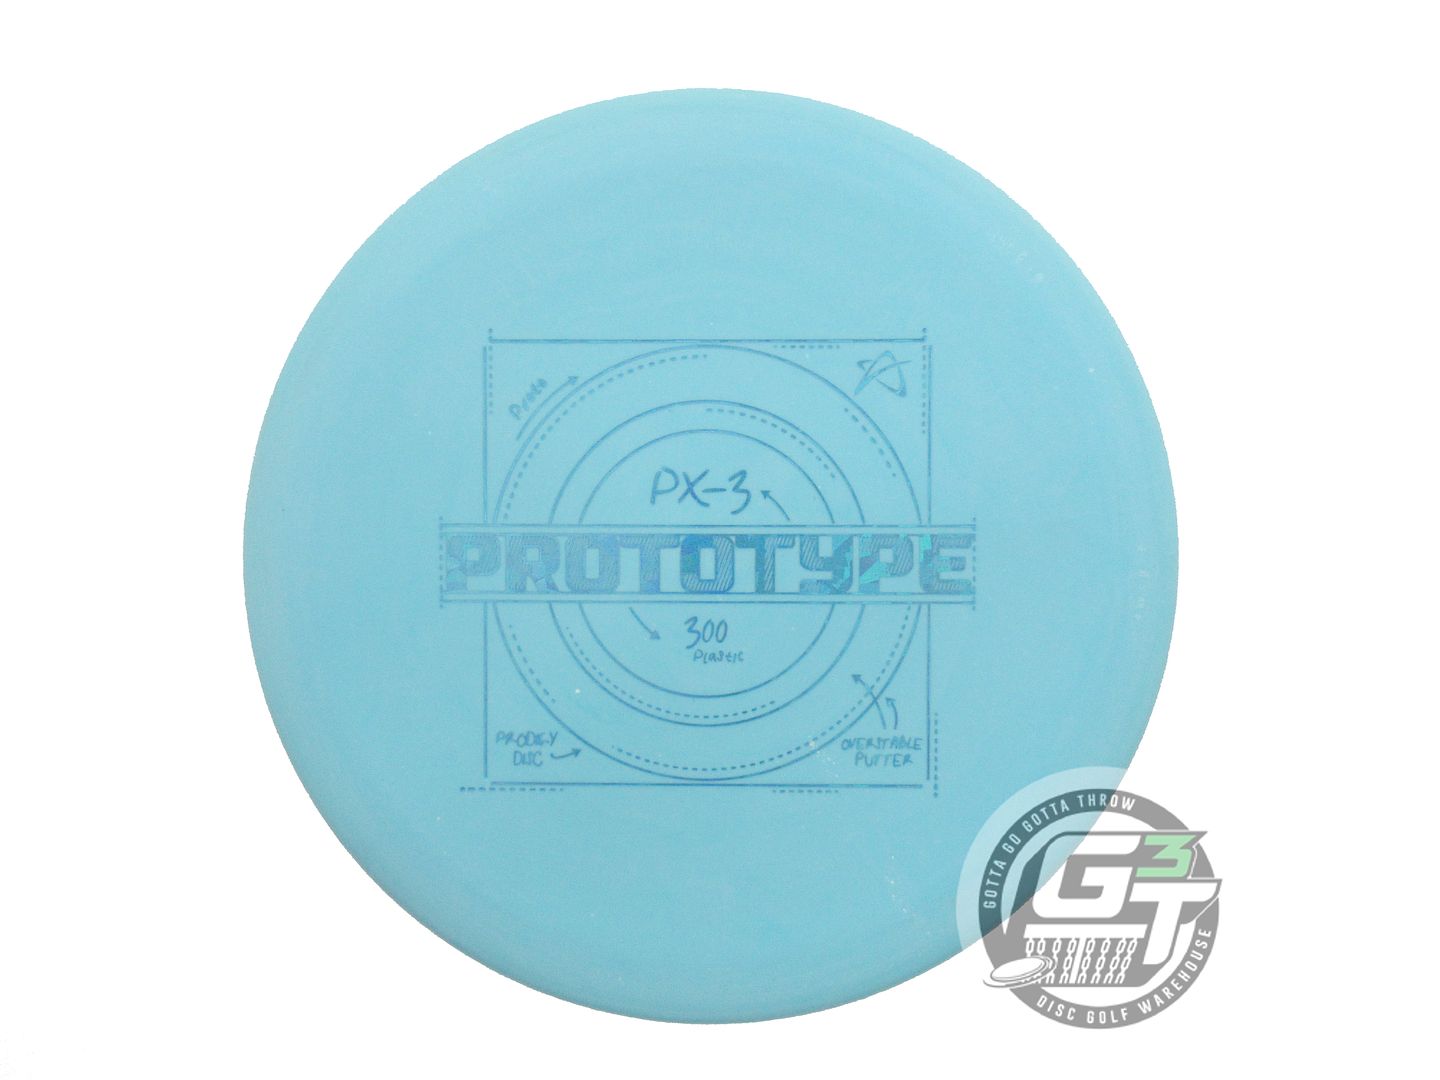 Prodigy Limited Edition Prototype 300 Series PX3 Putter Golf Disc (Individually Listed)